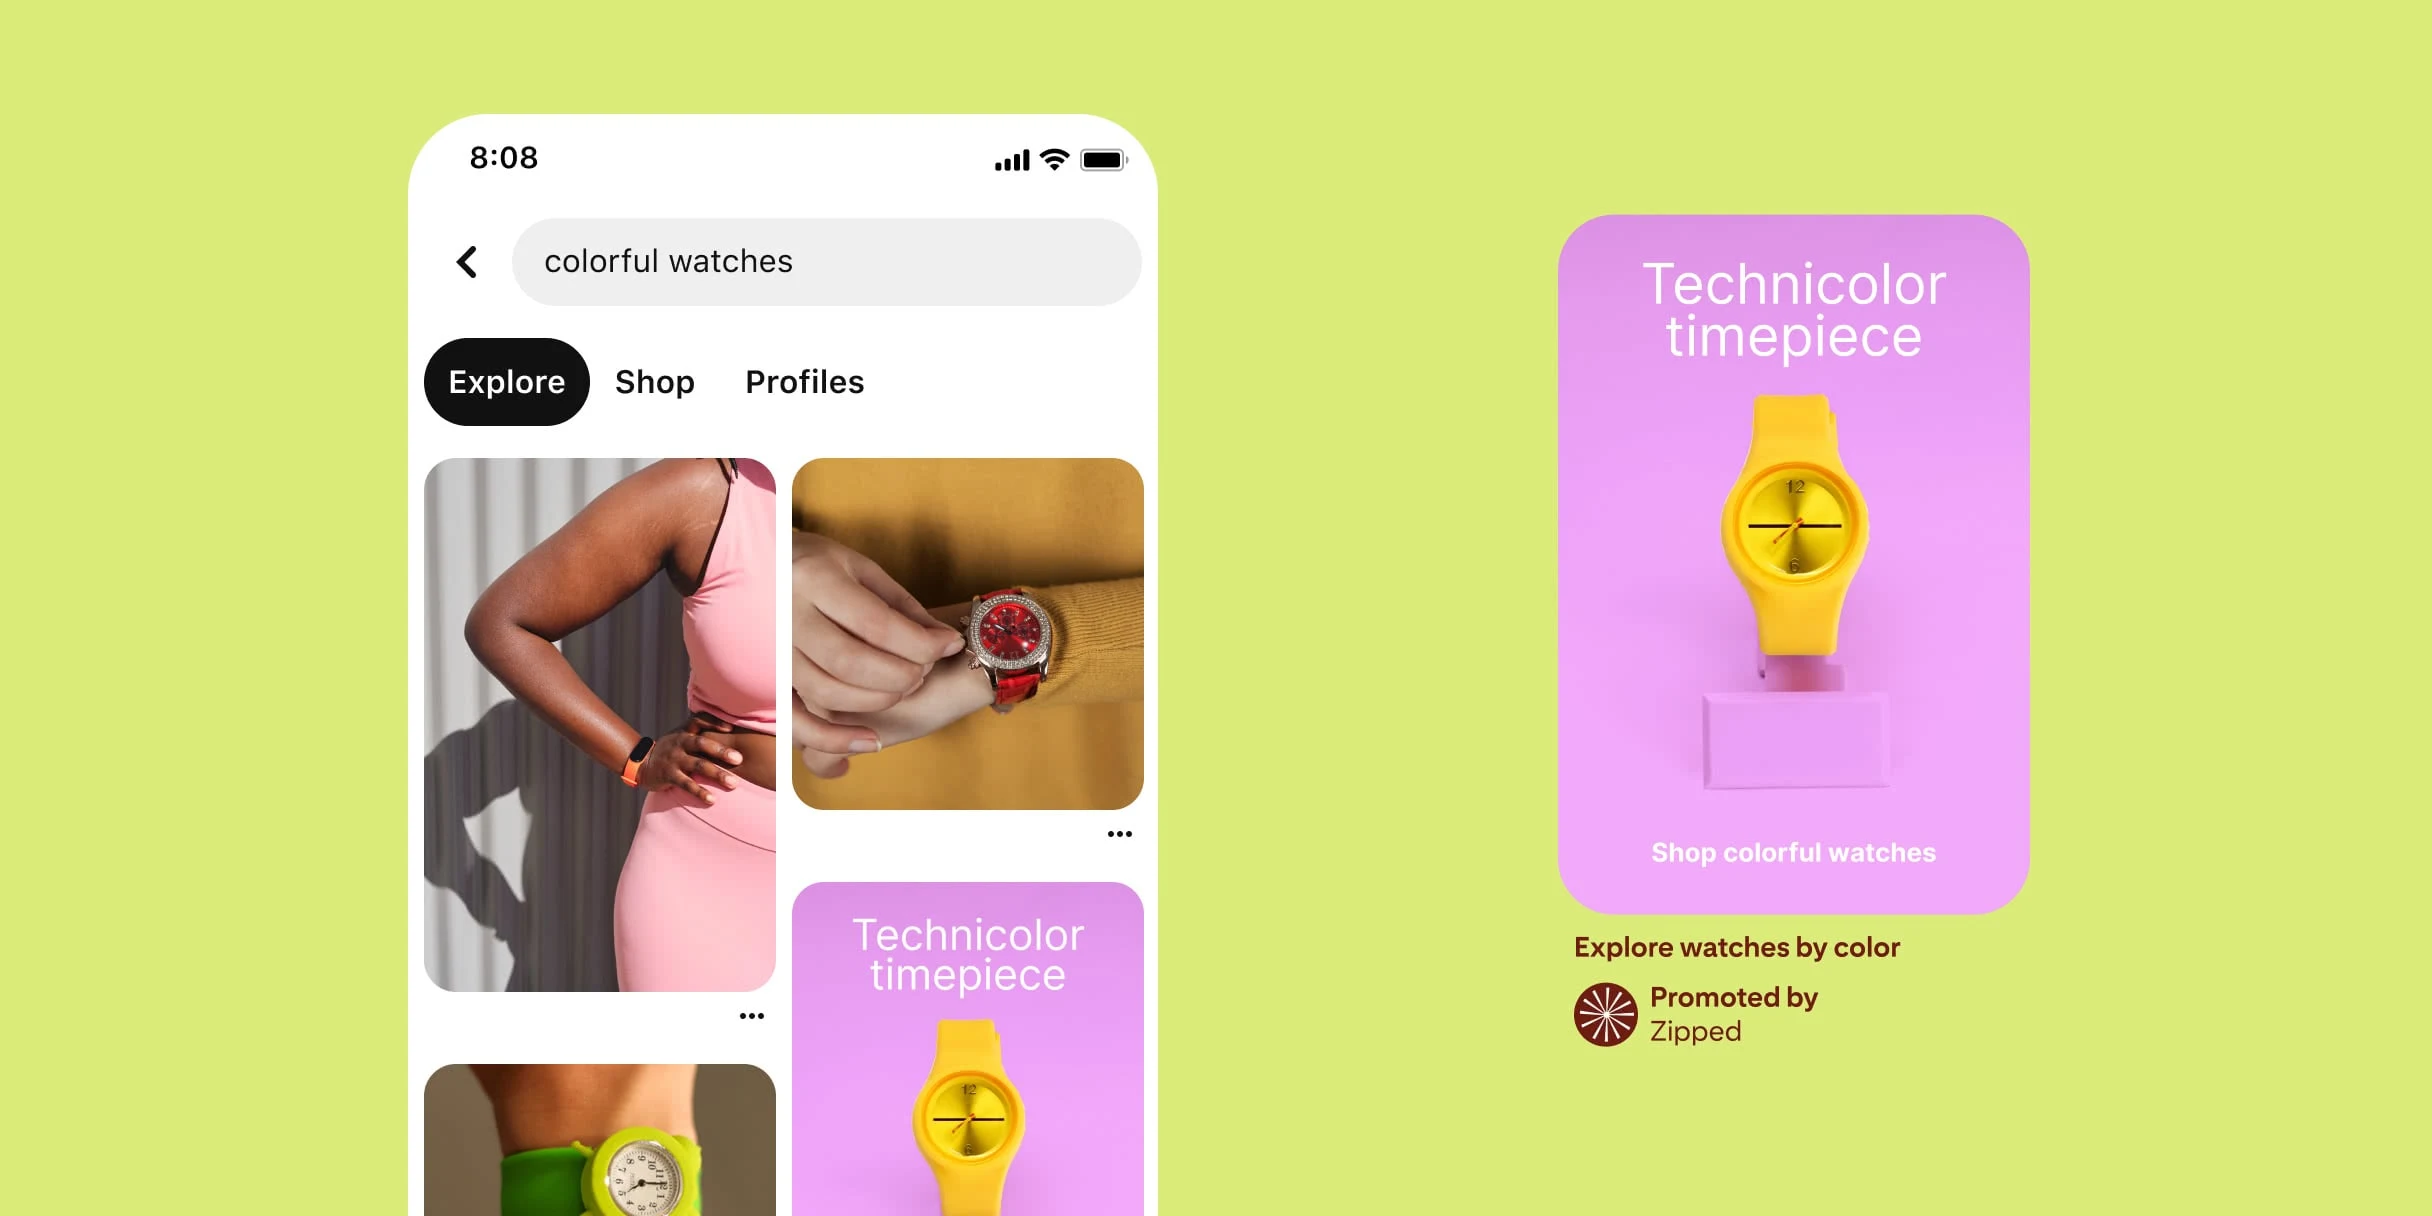 Pinterest search results for colorful watches. Black woman in pink with a hand on her hip, pink wrist watch. White hands, one with red wristwatch, the other with a green one. Pin of a yellow watch against a purple background with the words, technicolor timepiece above. Under, the words shop colorful watches. Description reads explore watches by color.